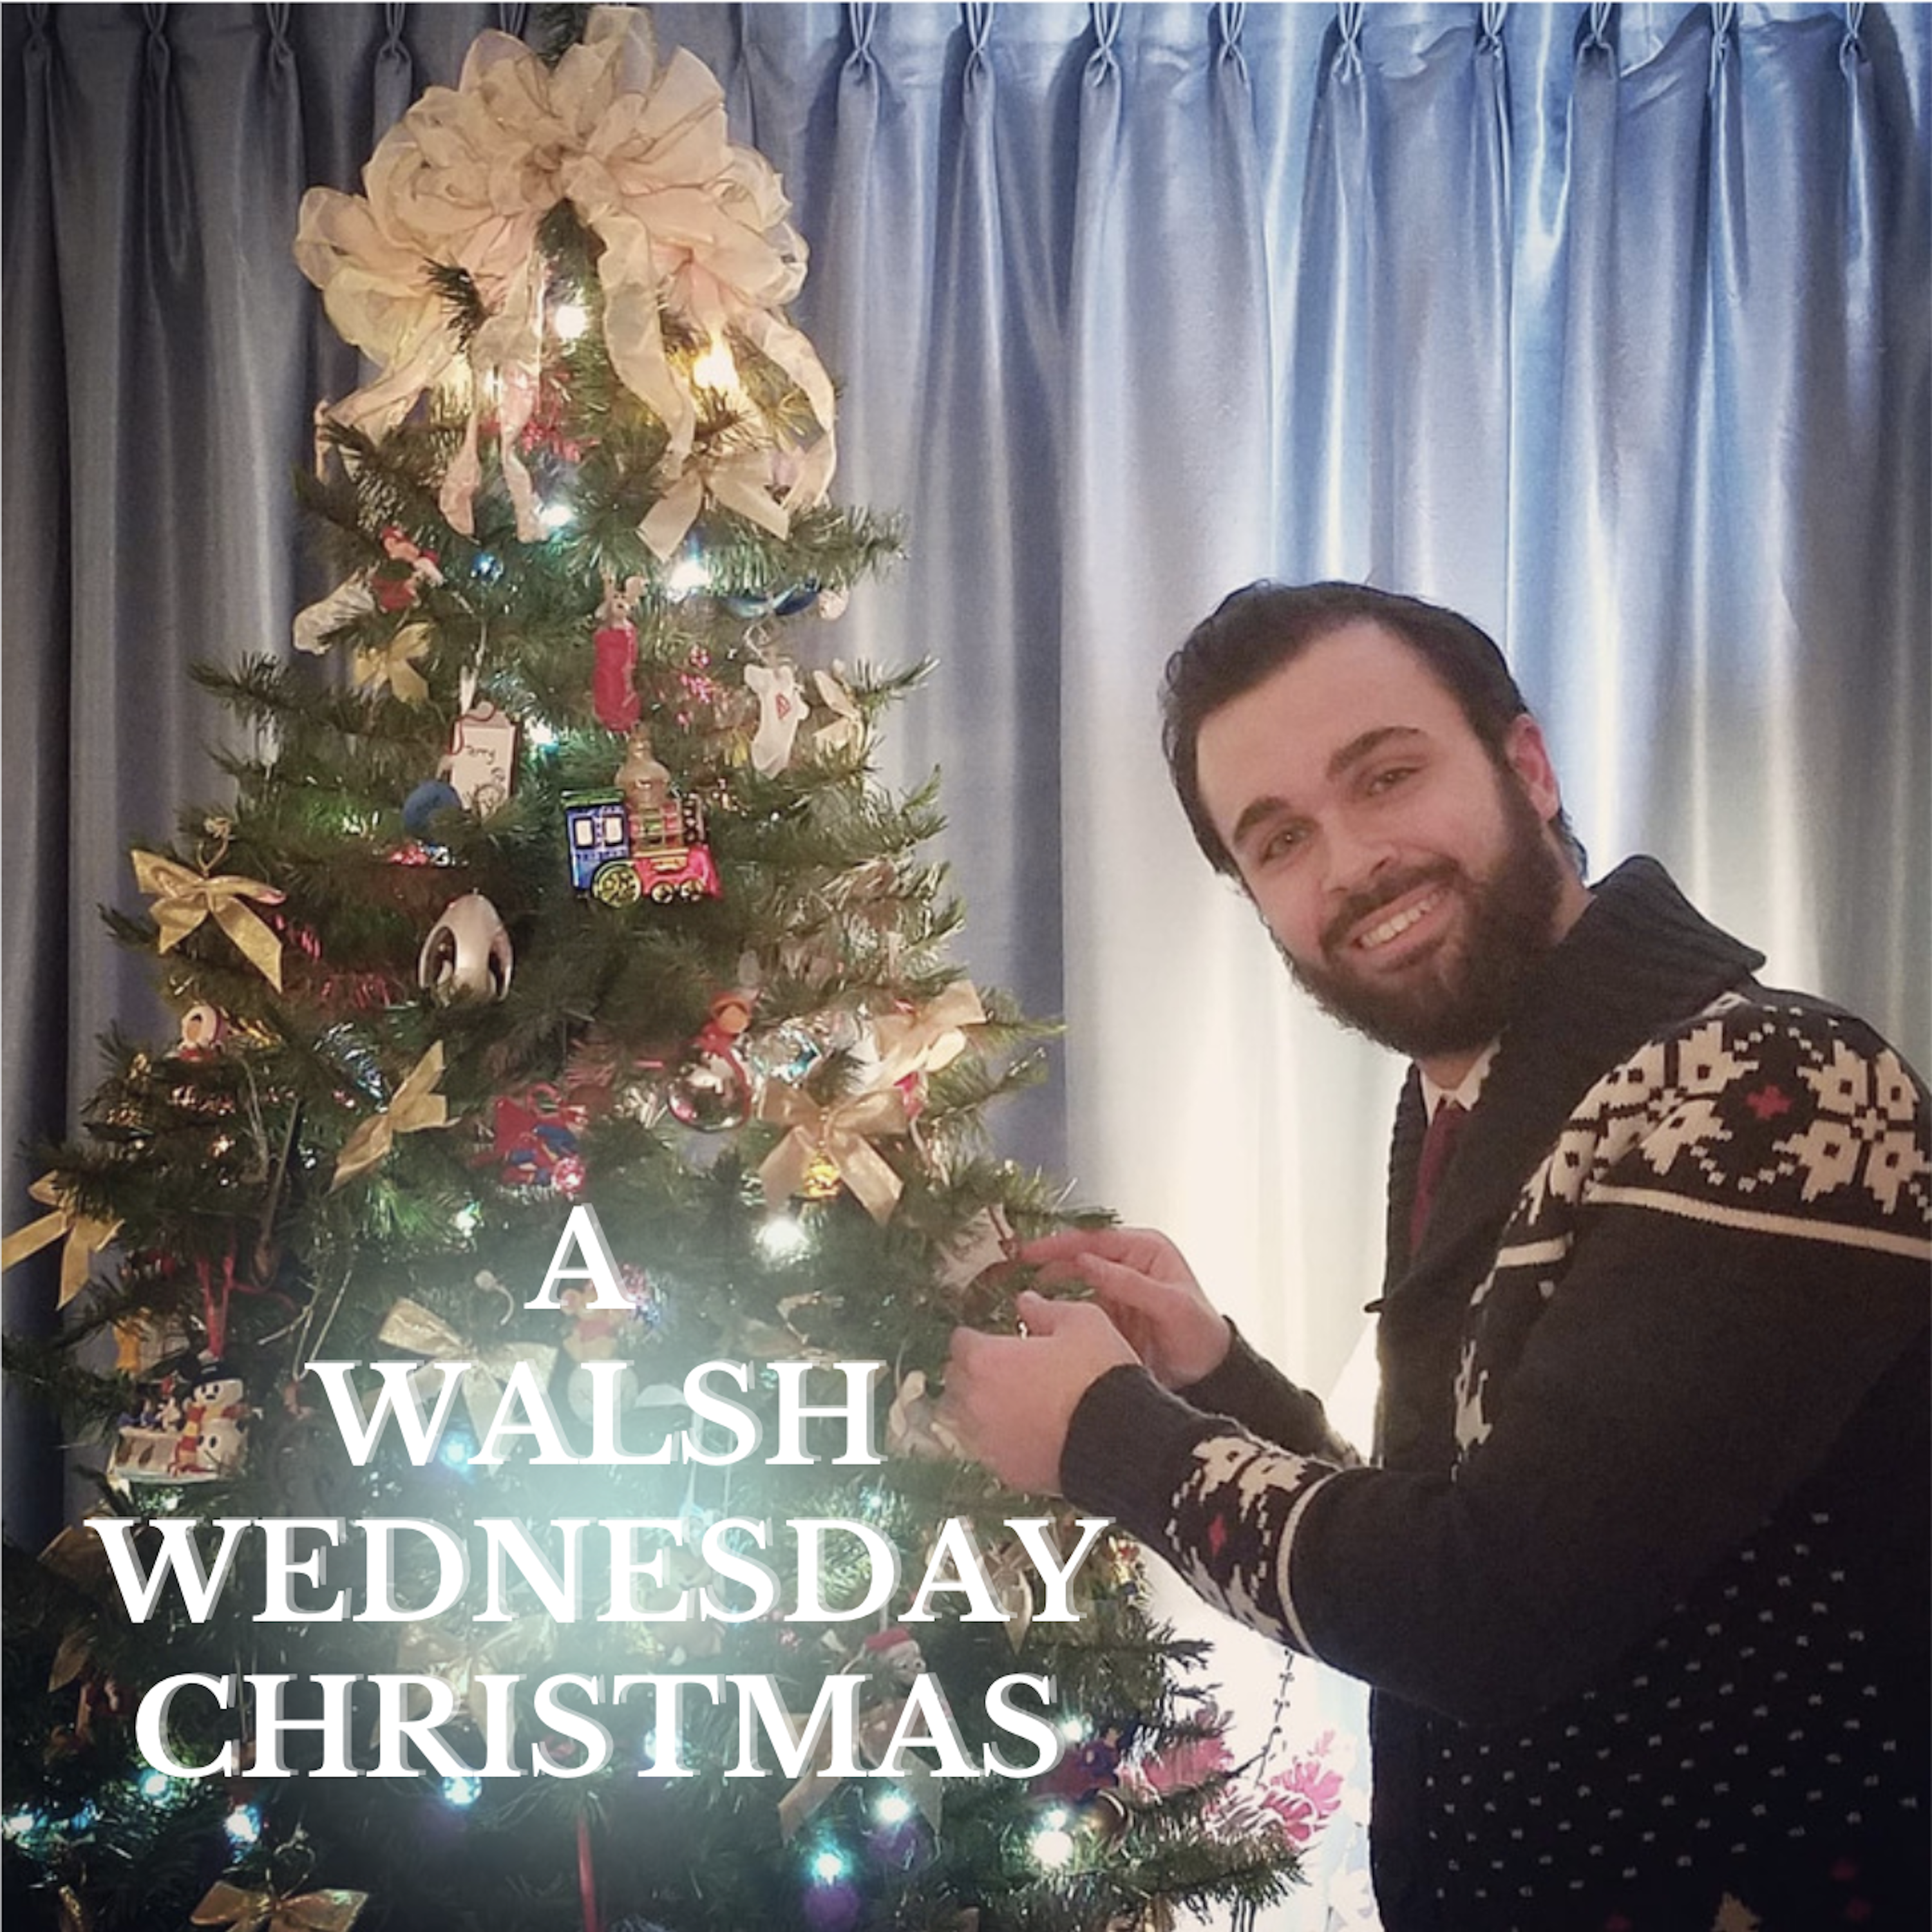 A Walsh Wednesday Christmas